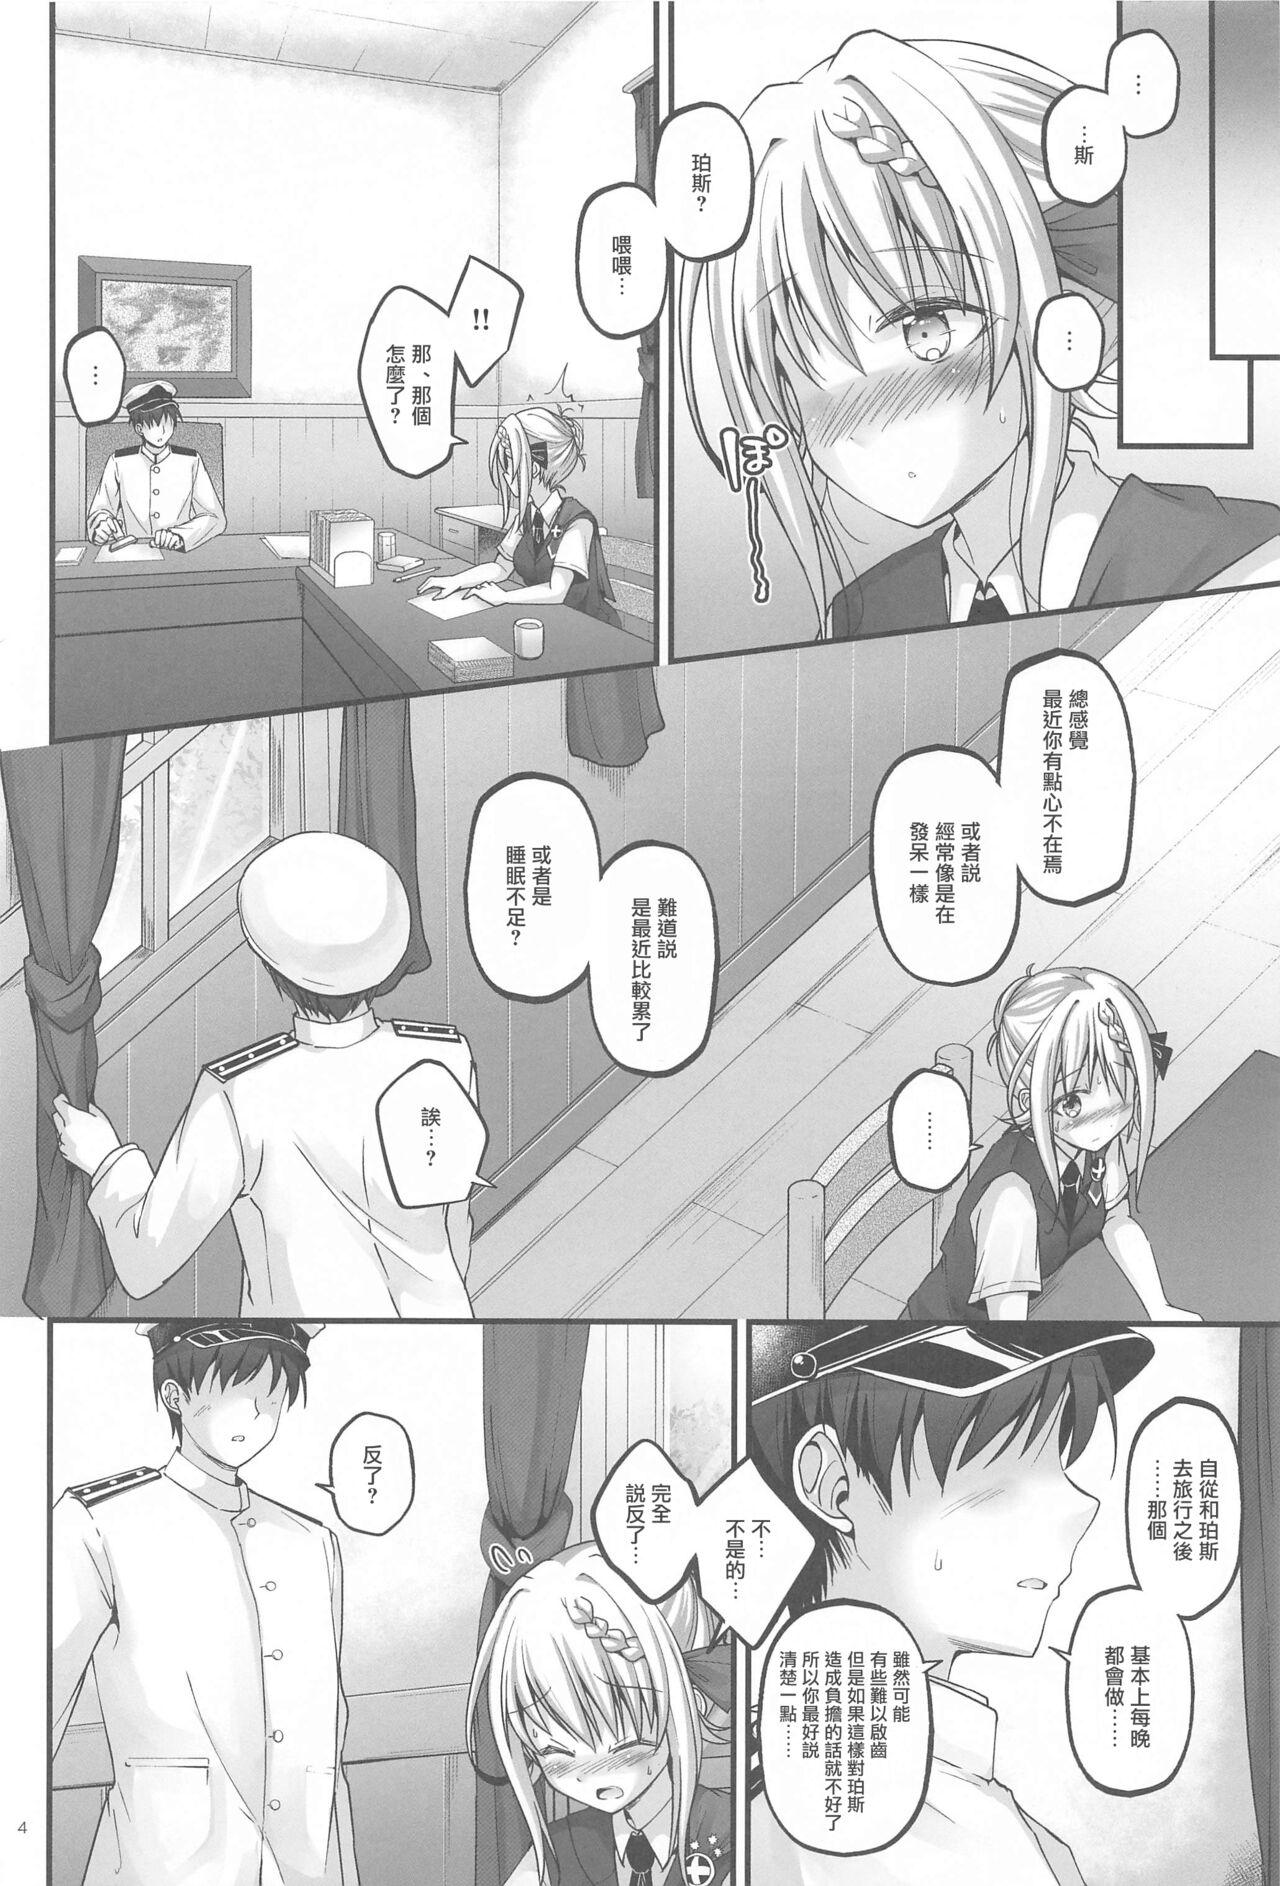 Moms (C99) [Pixel Cot. (Habara Meguru)] Mitsugetsu Perth -AFTER- | 蜜月珀斯 -AFTER- (Kantai Collection -KanColle-) [Chinese] - Kantai collection Cum Swallow - Page 3